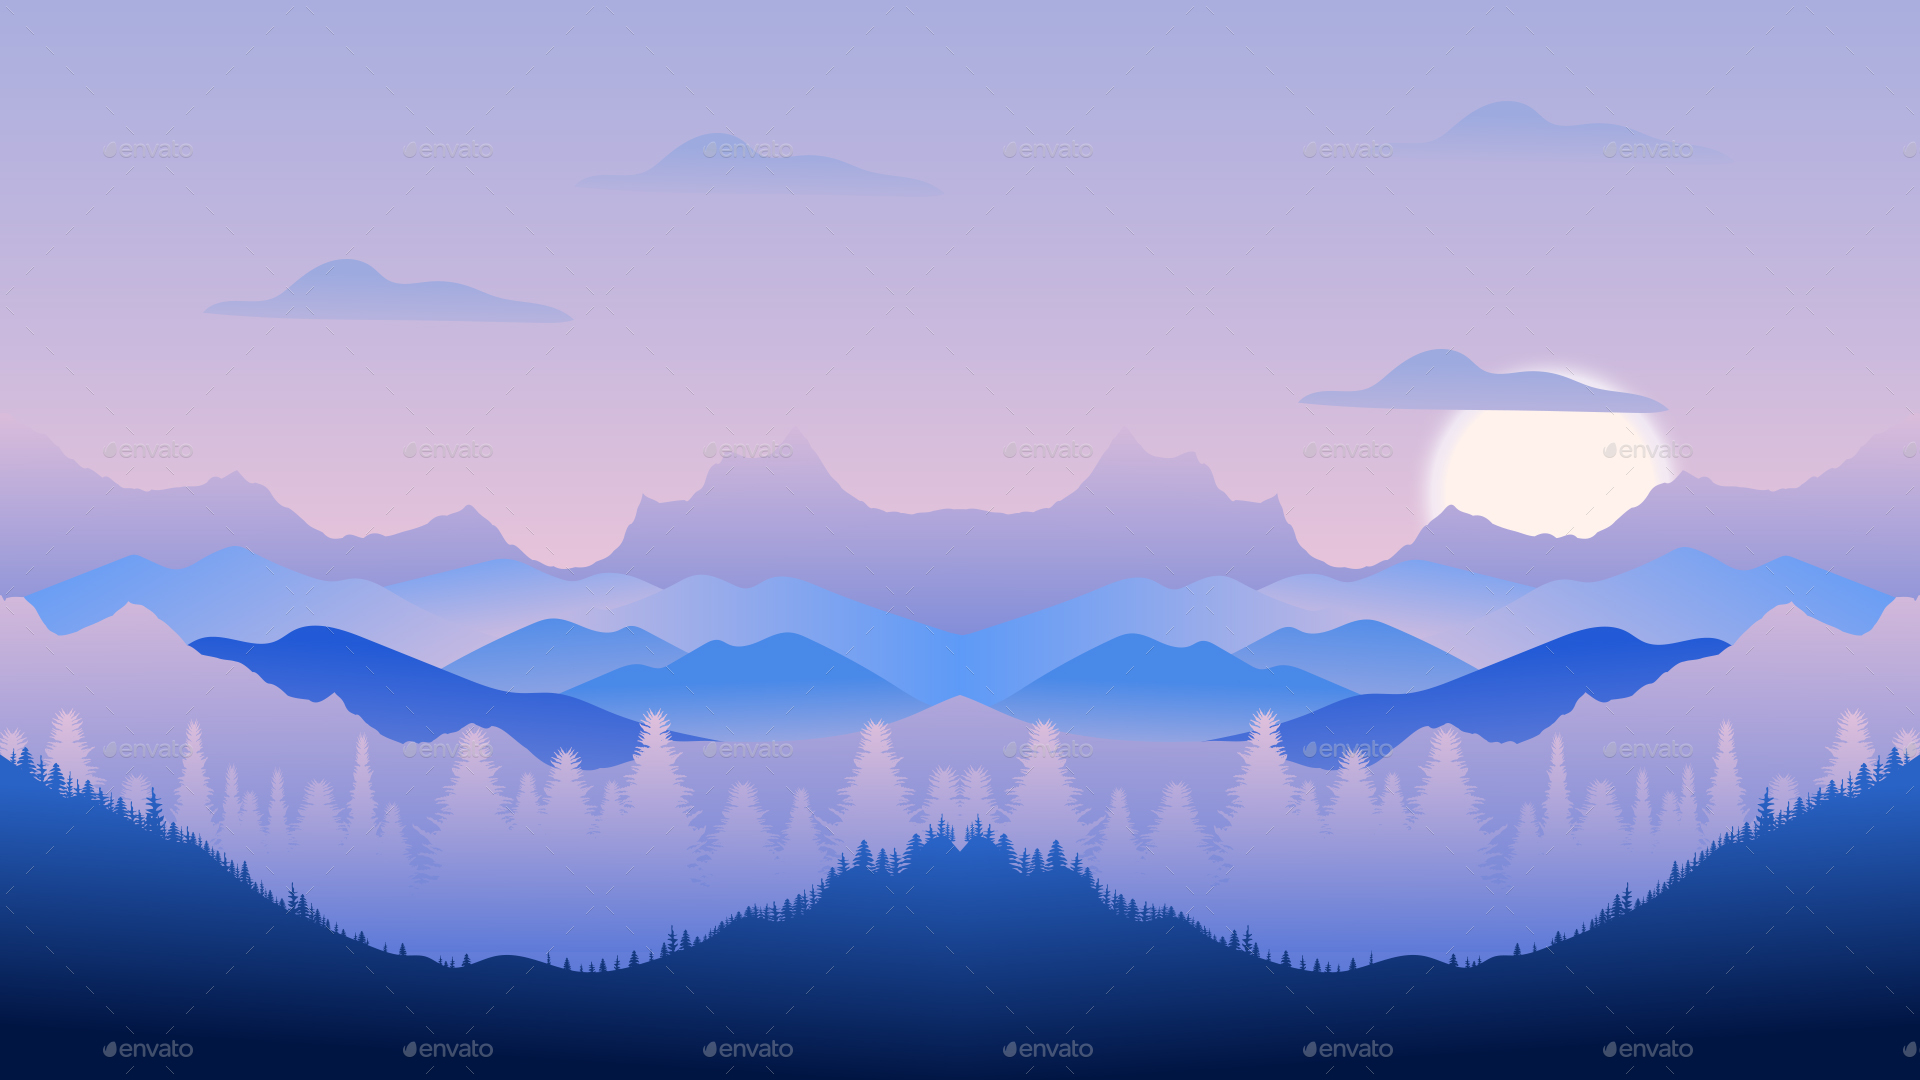 simple parallax background image css